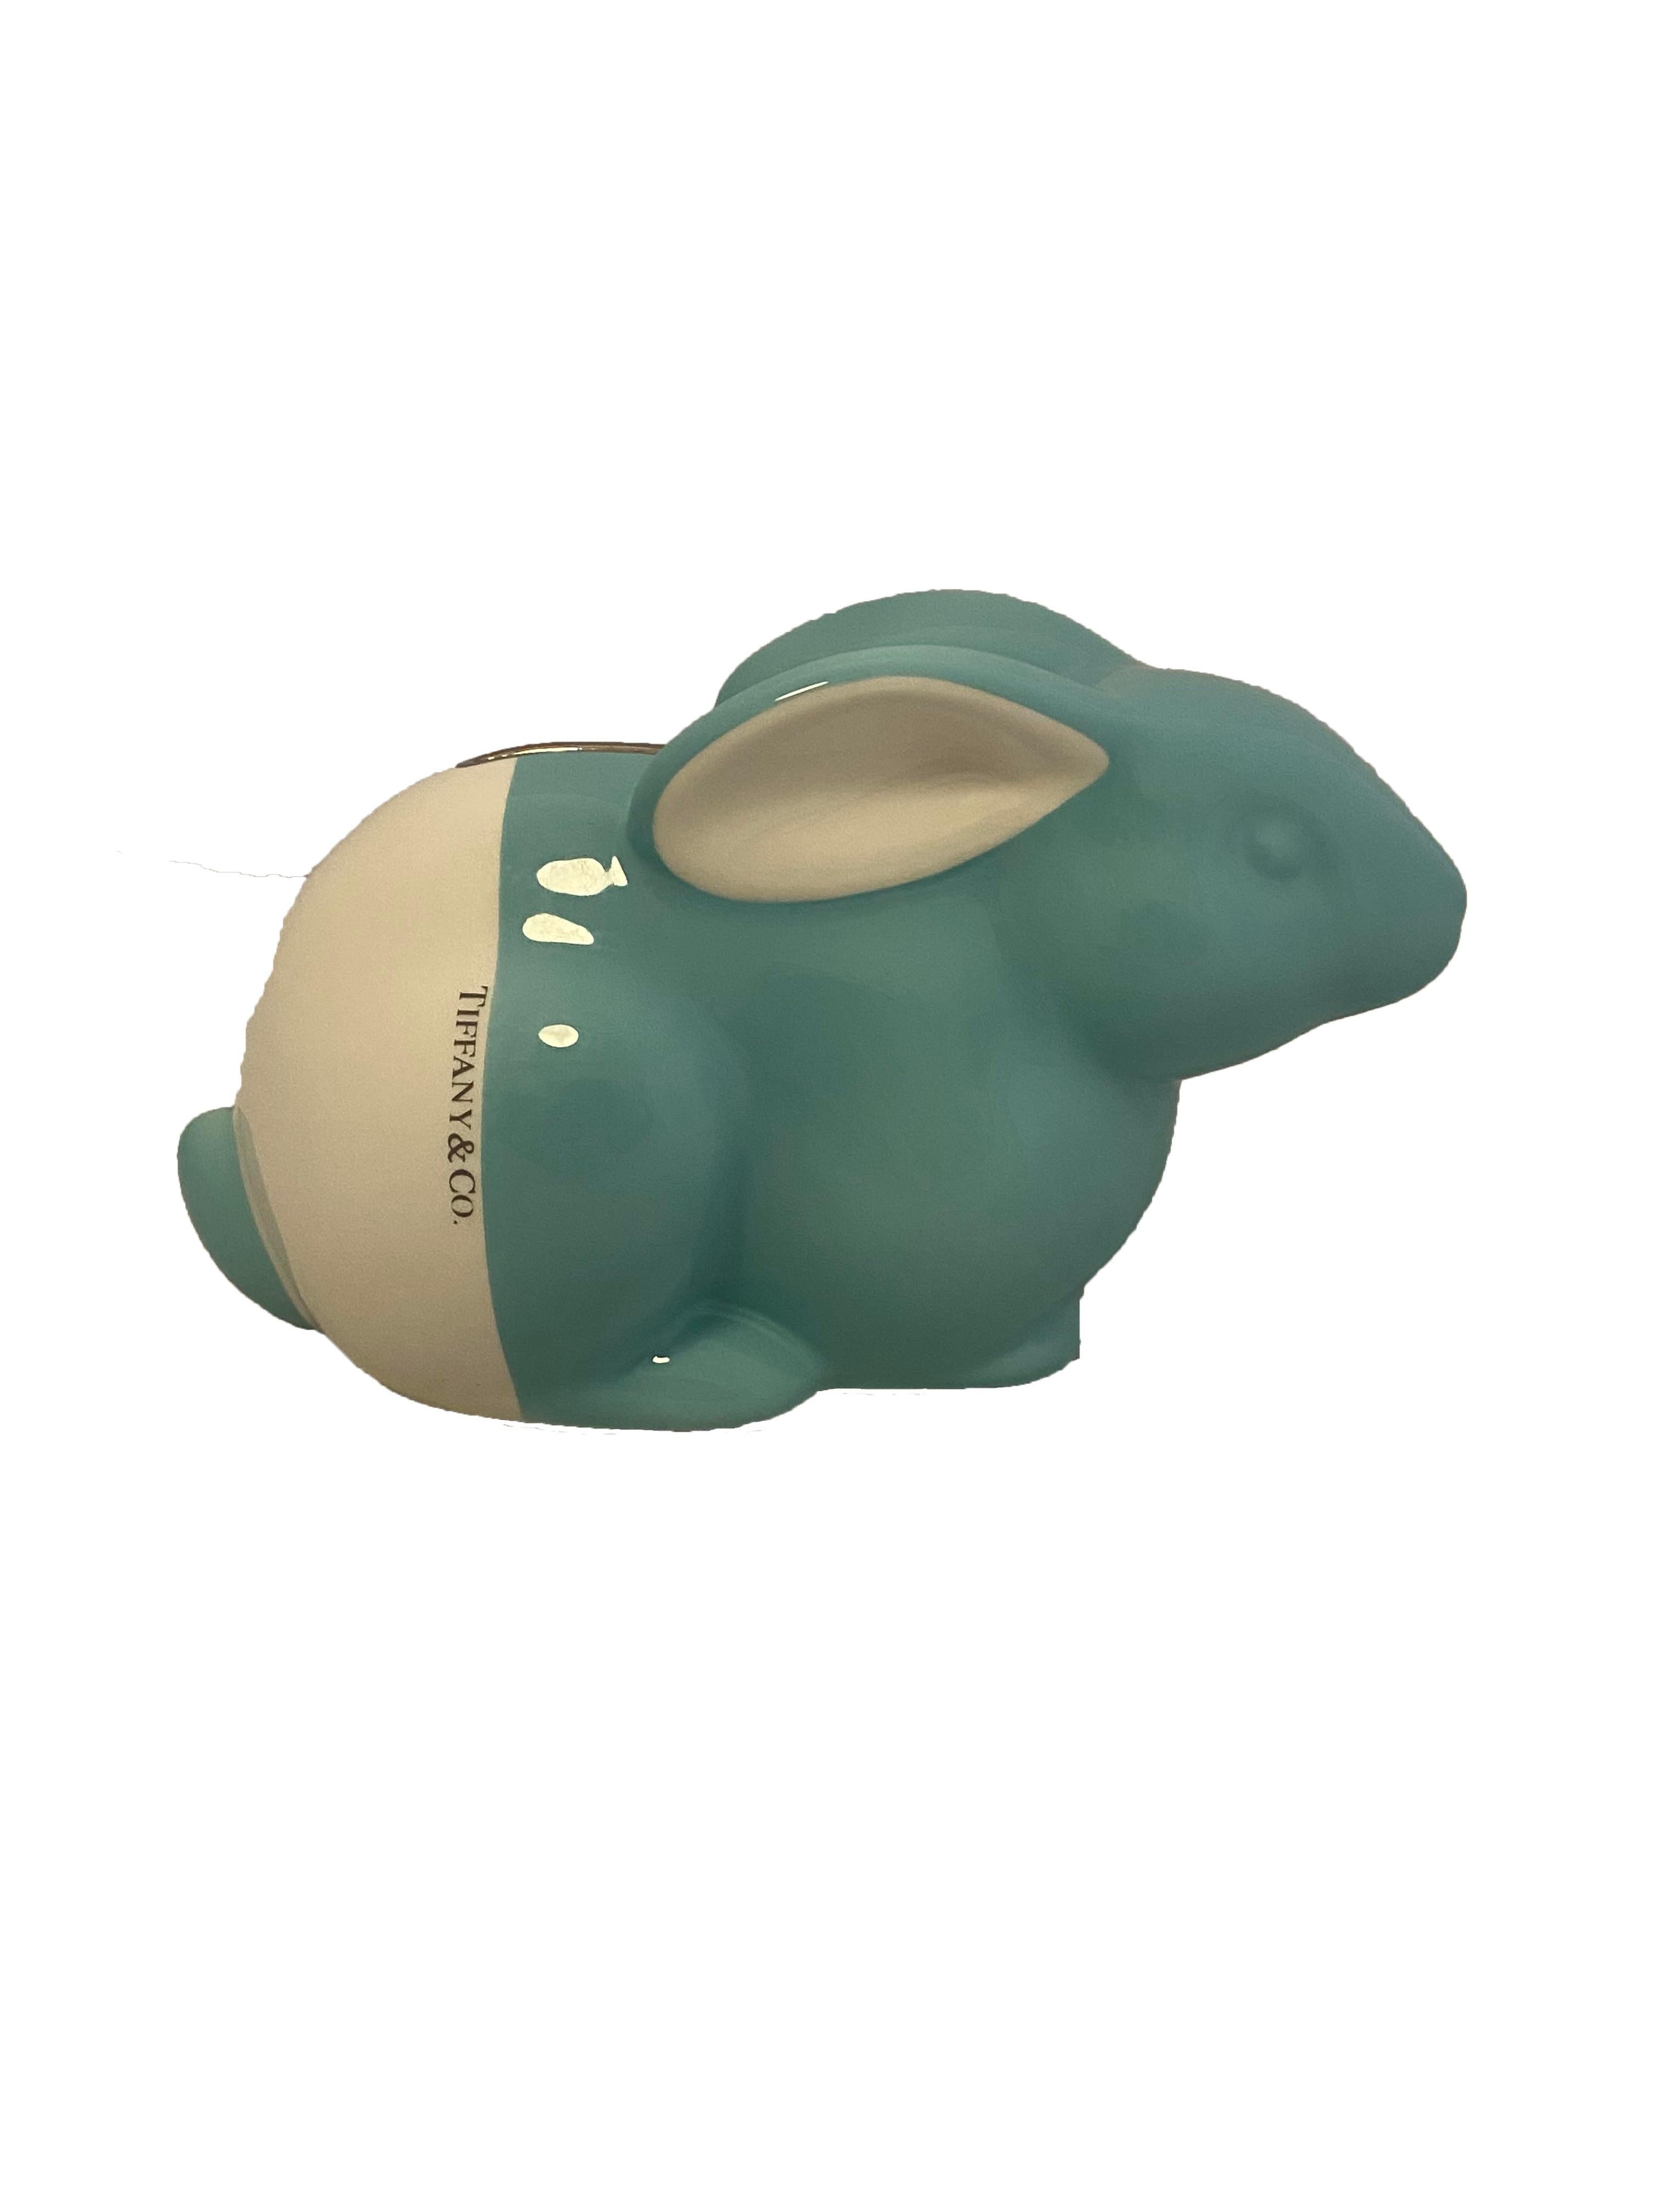 White and blue ceramic piggy bank from Tiffany & Co. Cute bunny shaped money bank crafted by Este Ceramiche in Italy and hand painted in the labels signature Tiffany blue and white with accent silver toned money slot at the top. Blue at the front